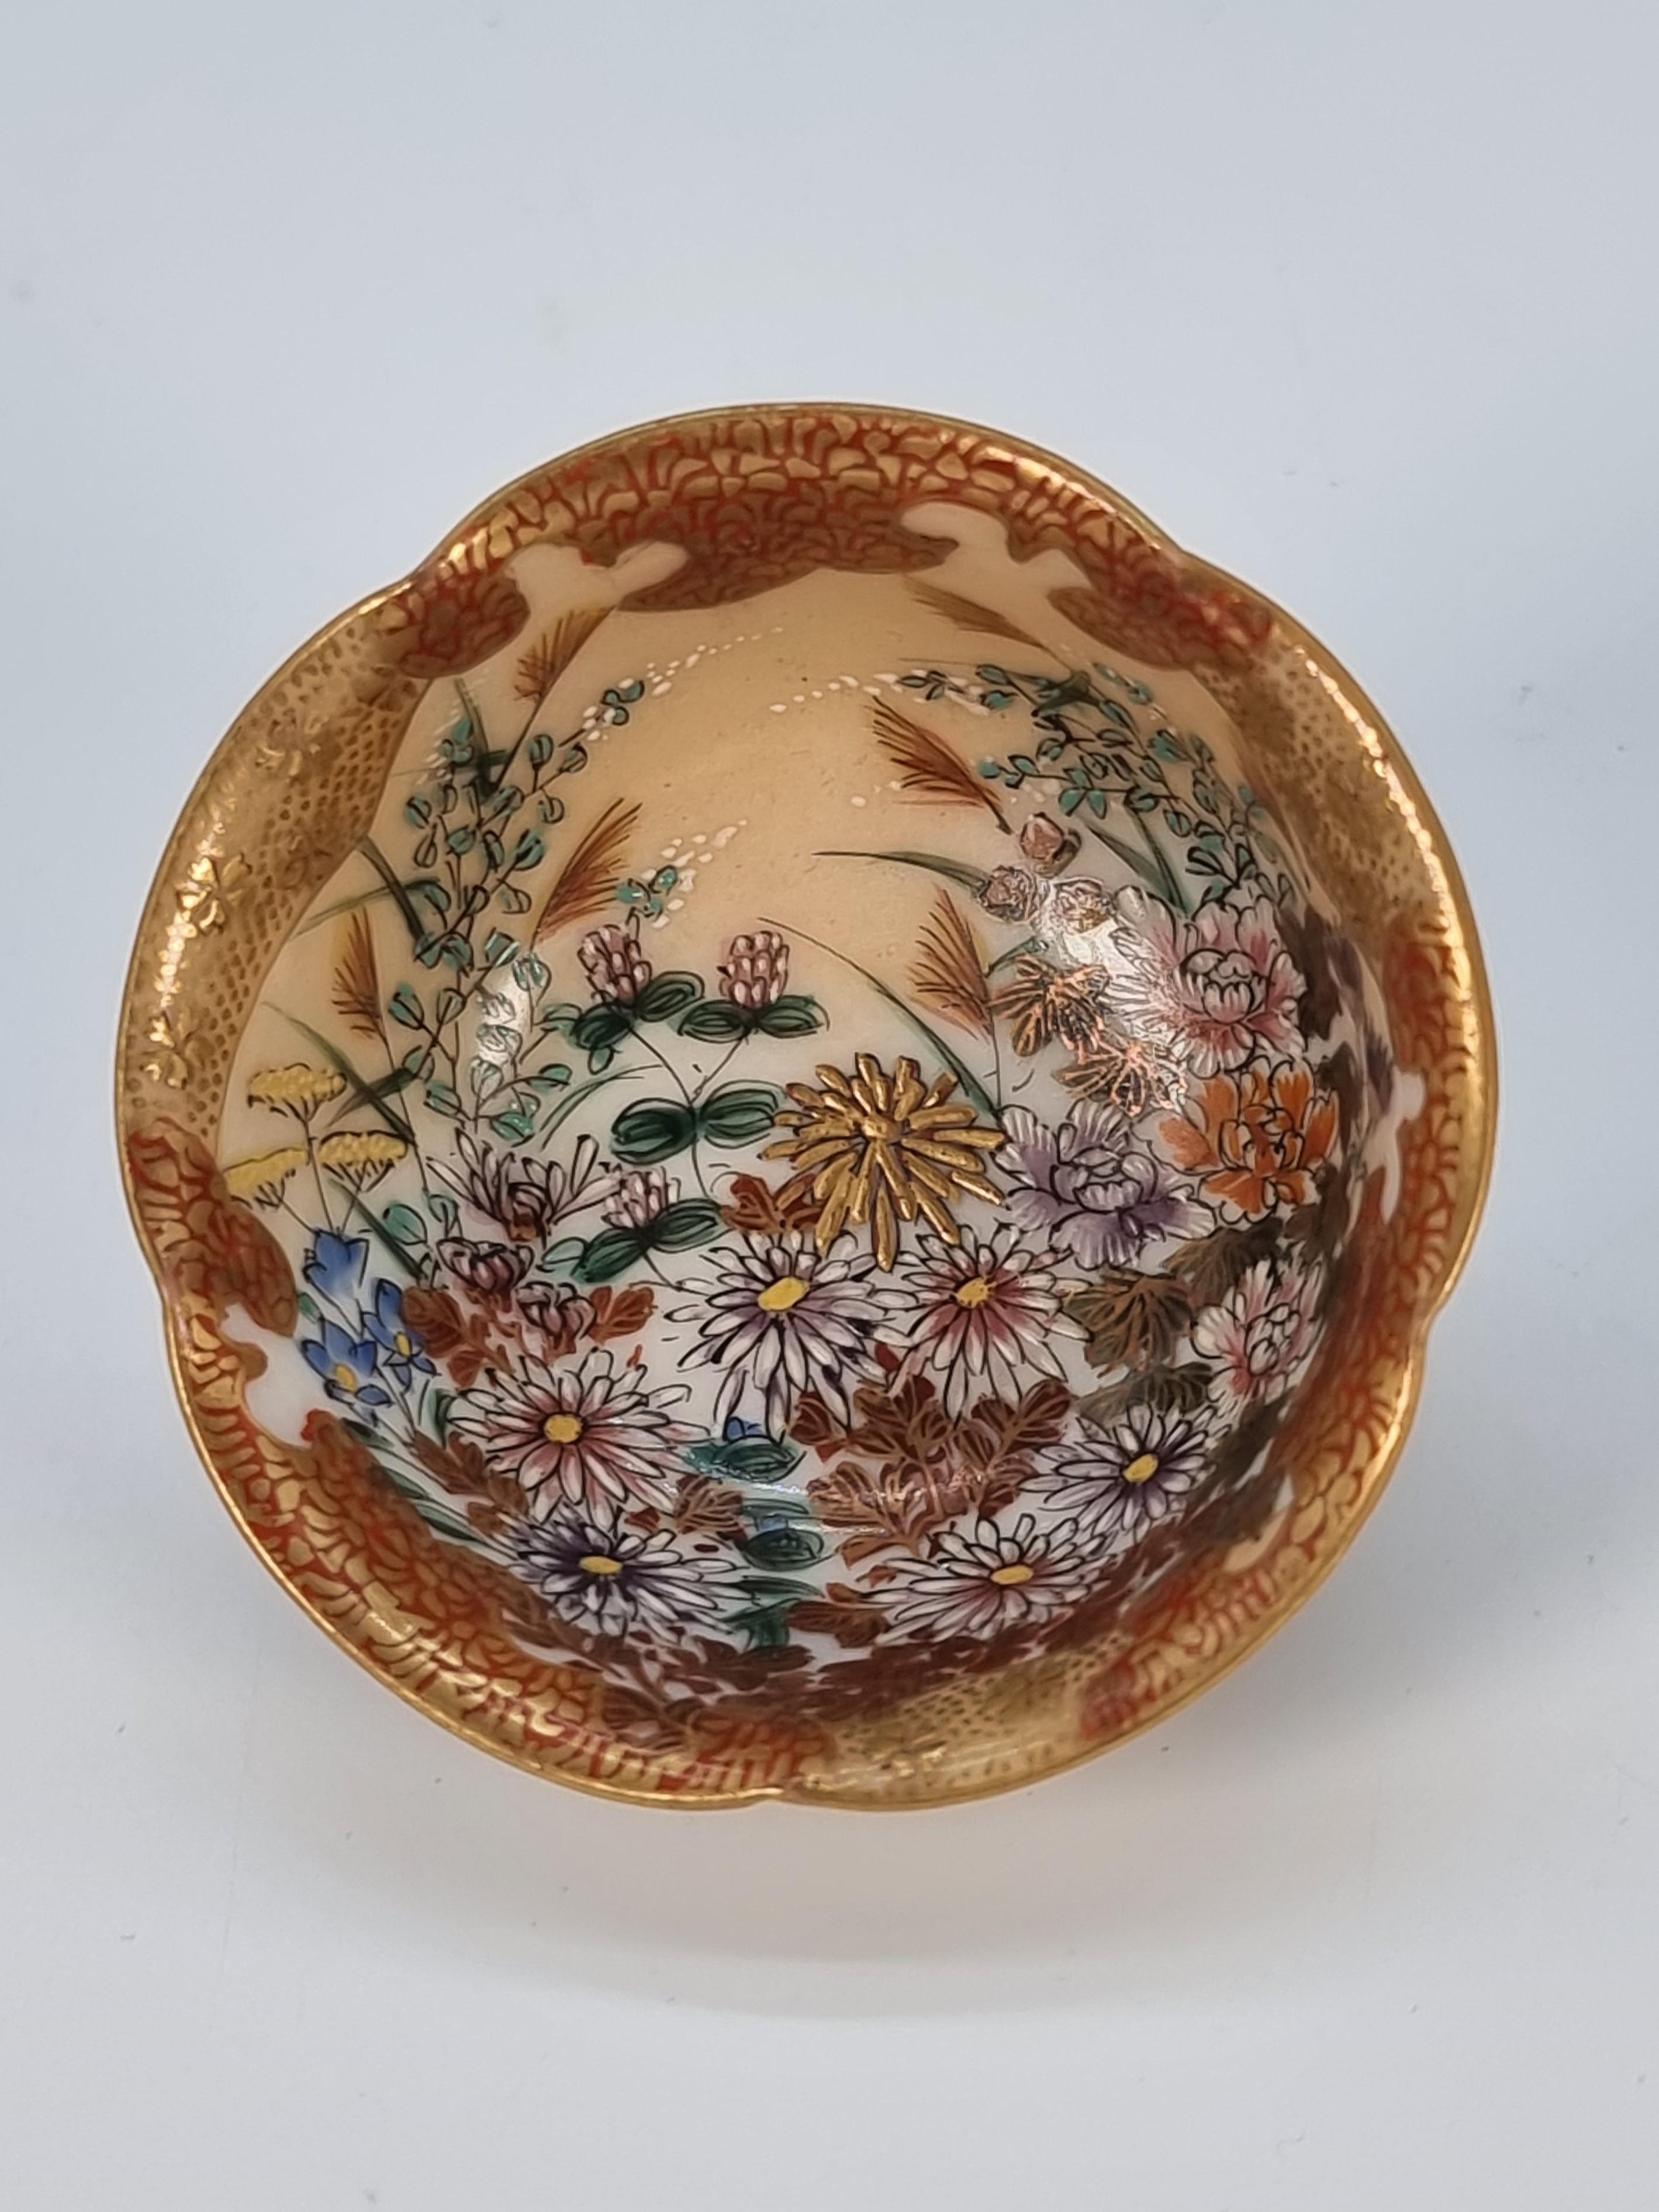 These superb miniature porcelain bowls originate from the Kutani region of Japan dating from the Meiji period circa 1880. They are superb examples of some of their finest workmanship which is rarely available to purchase. This tiny pair of bowls is